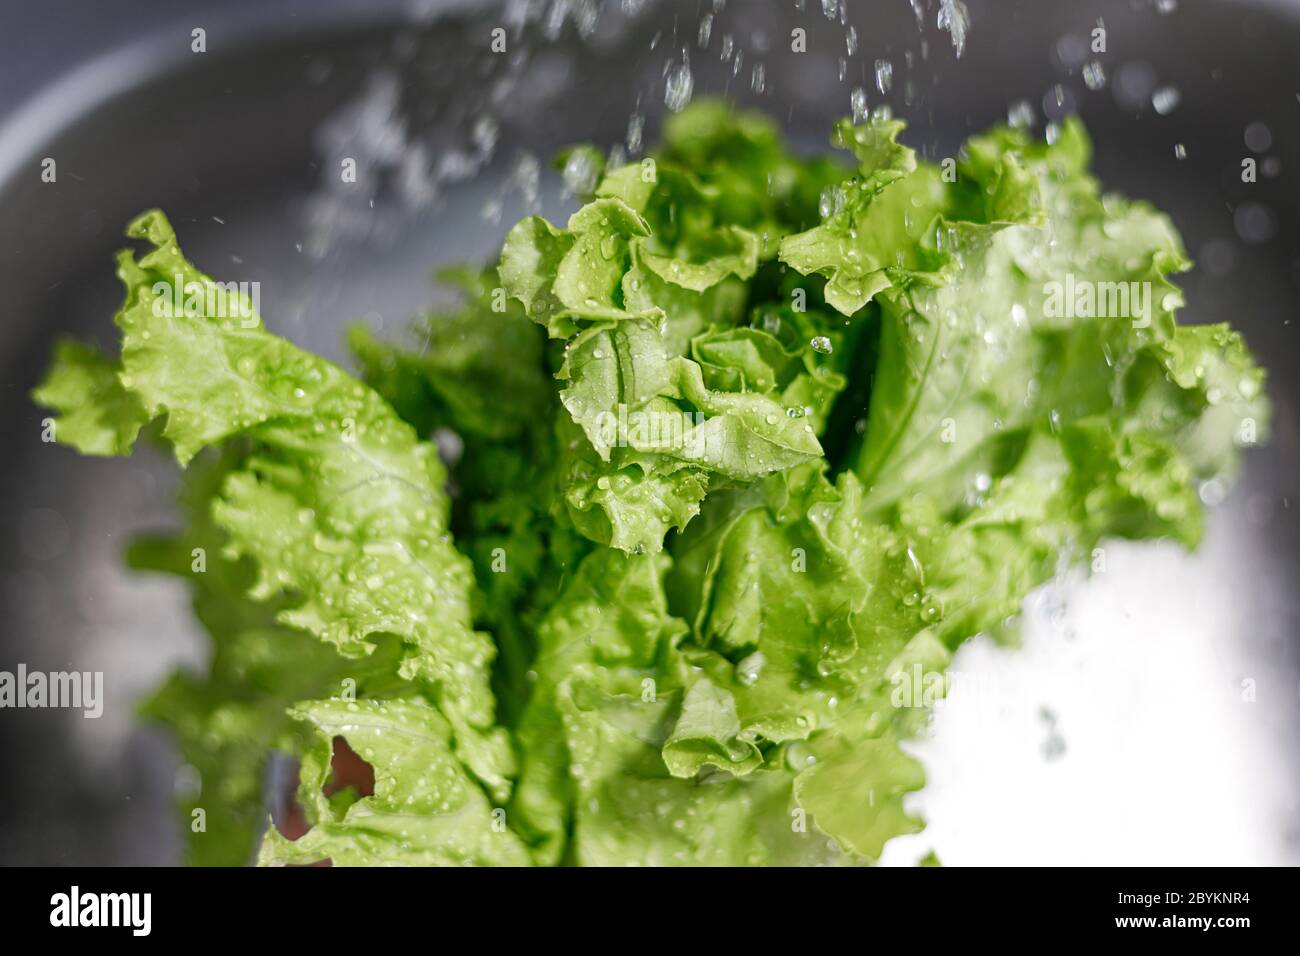 Man's hands washing lettuce leaves. Water flowing on lettuce. Stock Photo